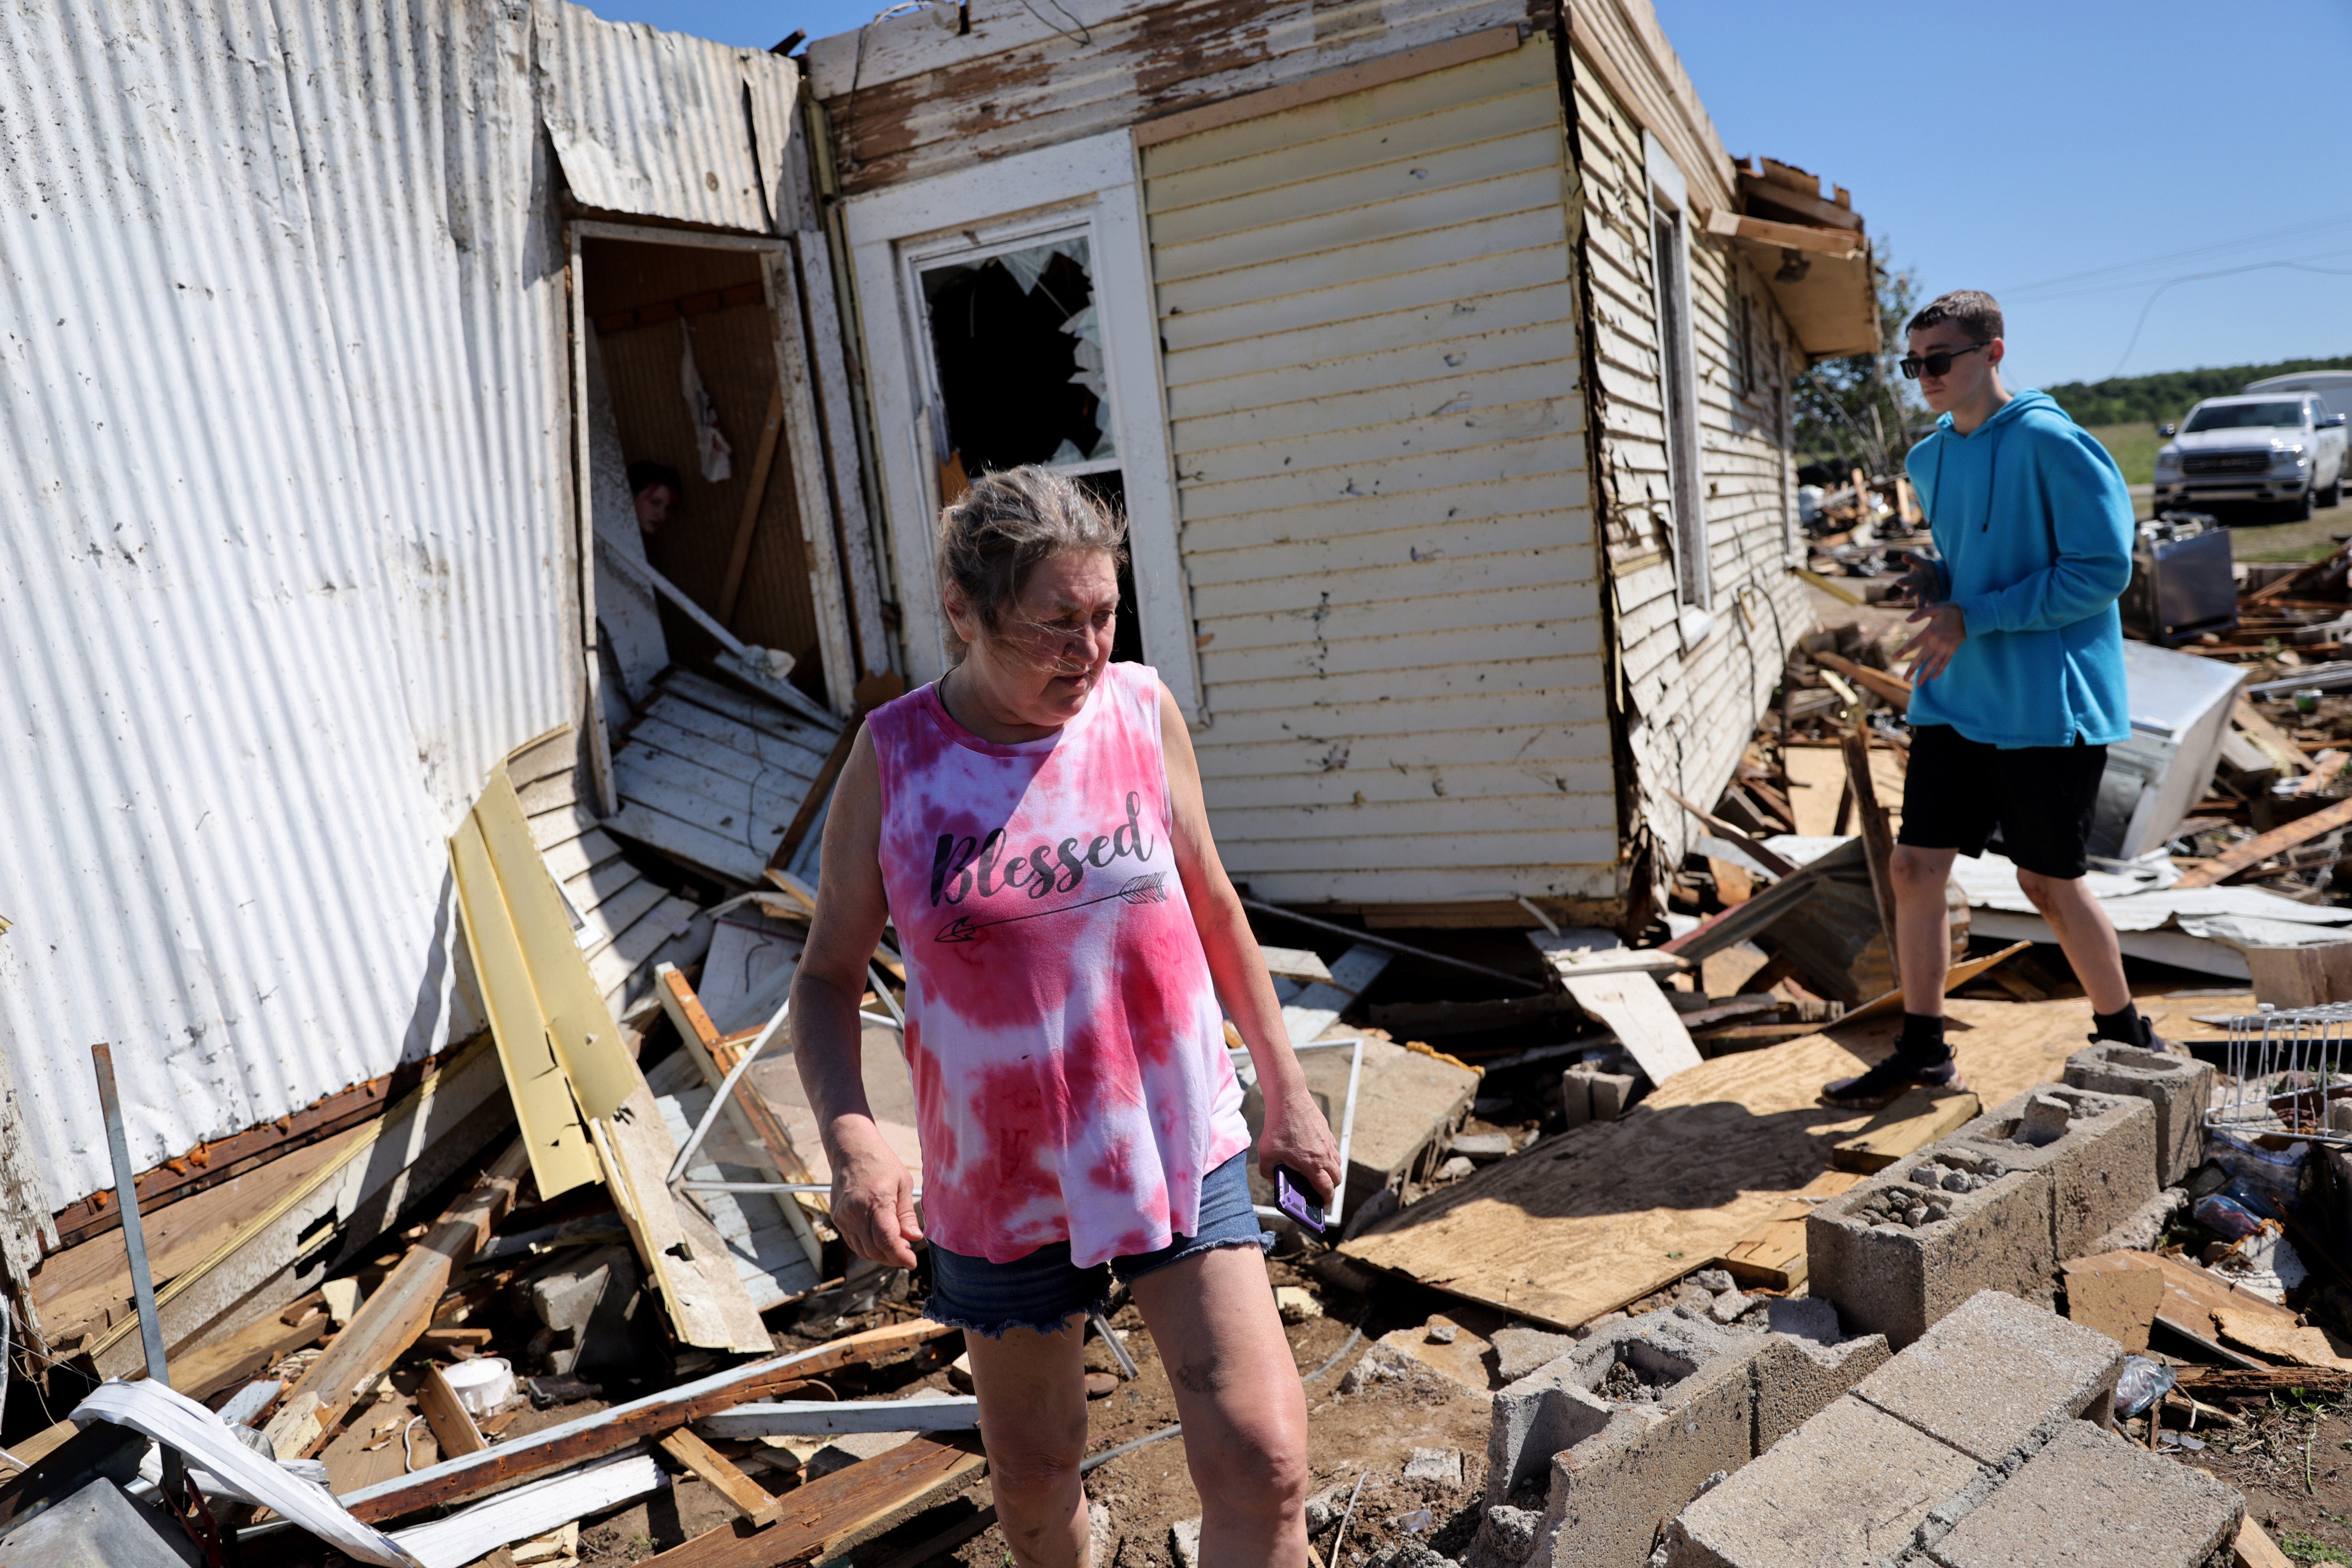 'We need prayers': A tornado left a path of destruction and death in Barnsdall, Oklahoma